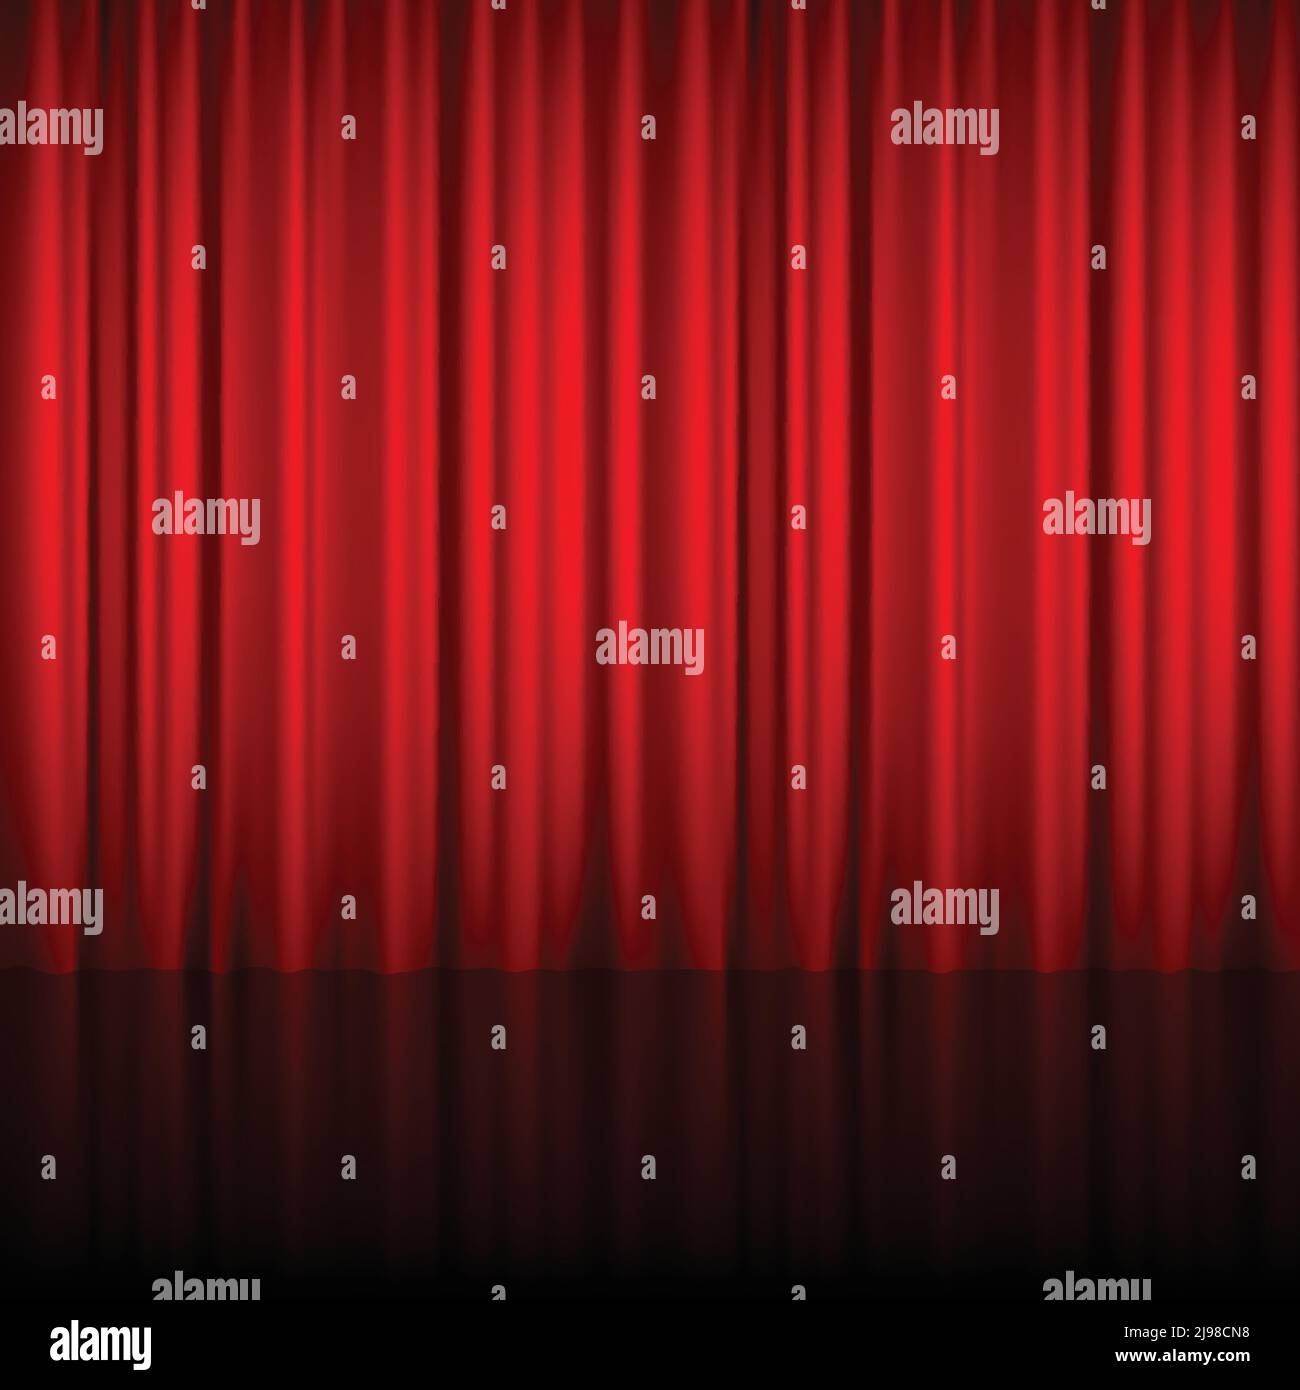 Realistic red theatrical closed curtain of shiny material with reflection on stage floor vector illustration Stock Vector